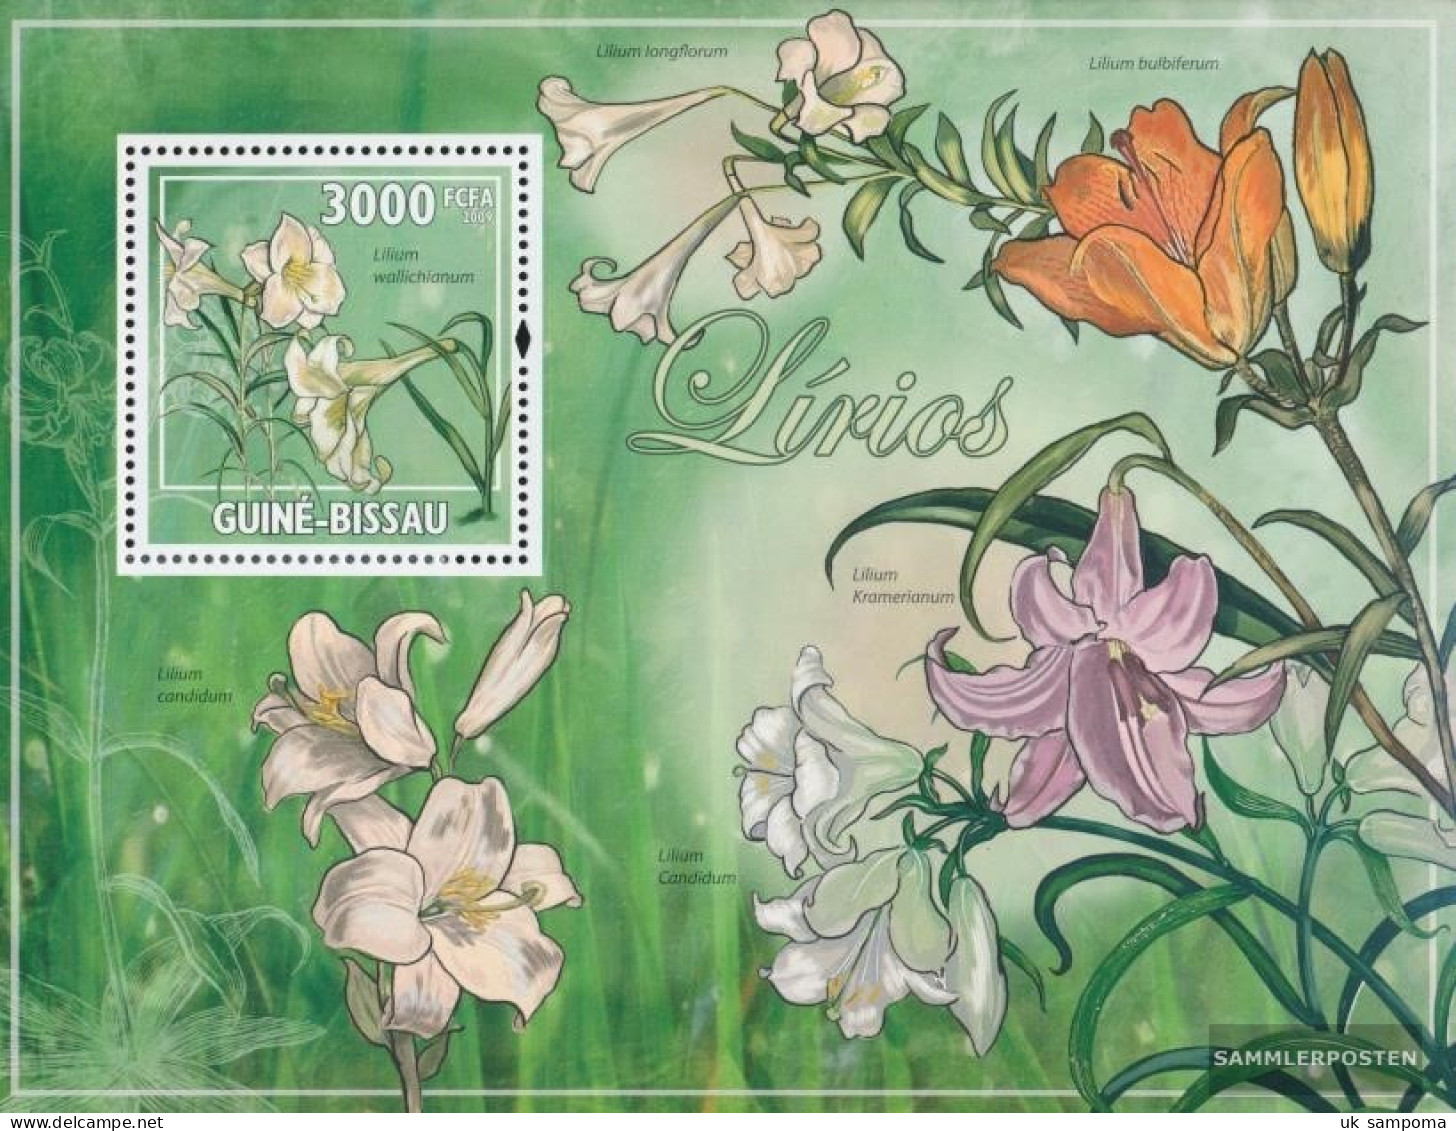 Guinea-Bissau Miniature Sheet 726 (complete. Issue) Unmounted Mint / Never Hinged 2009 Lilies - Guinea-Bissau